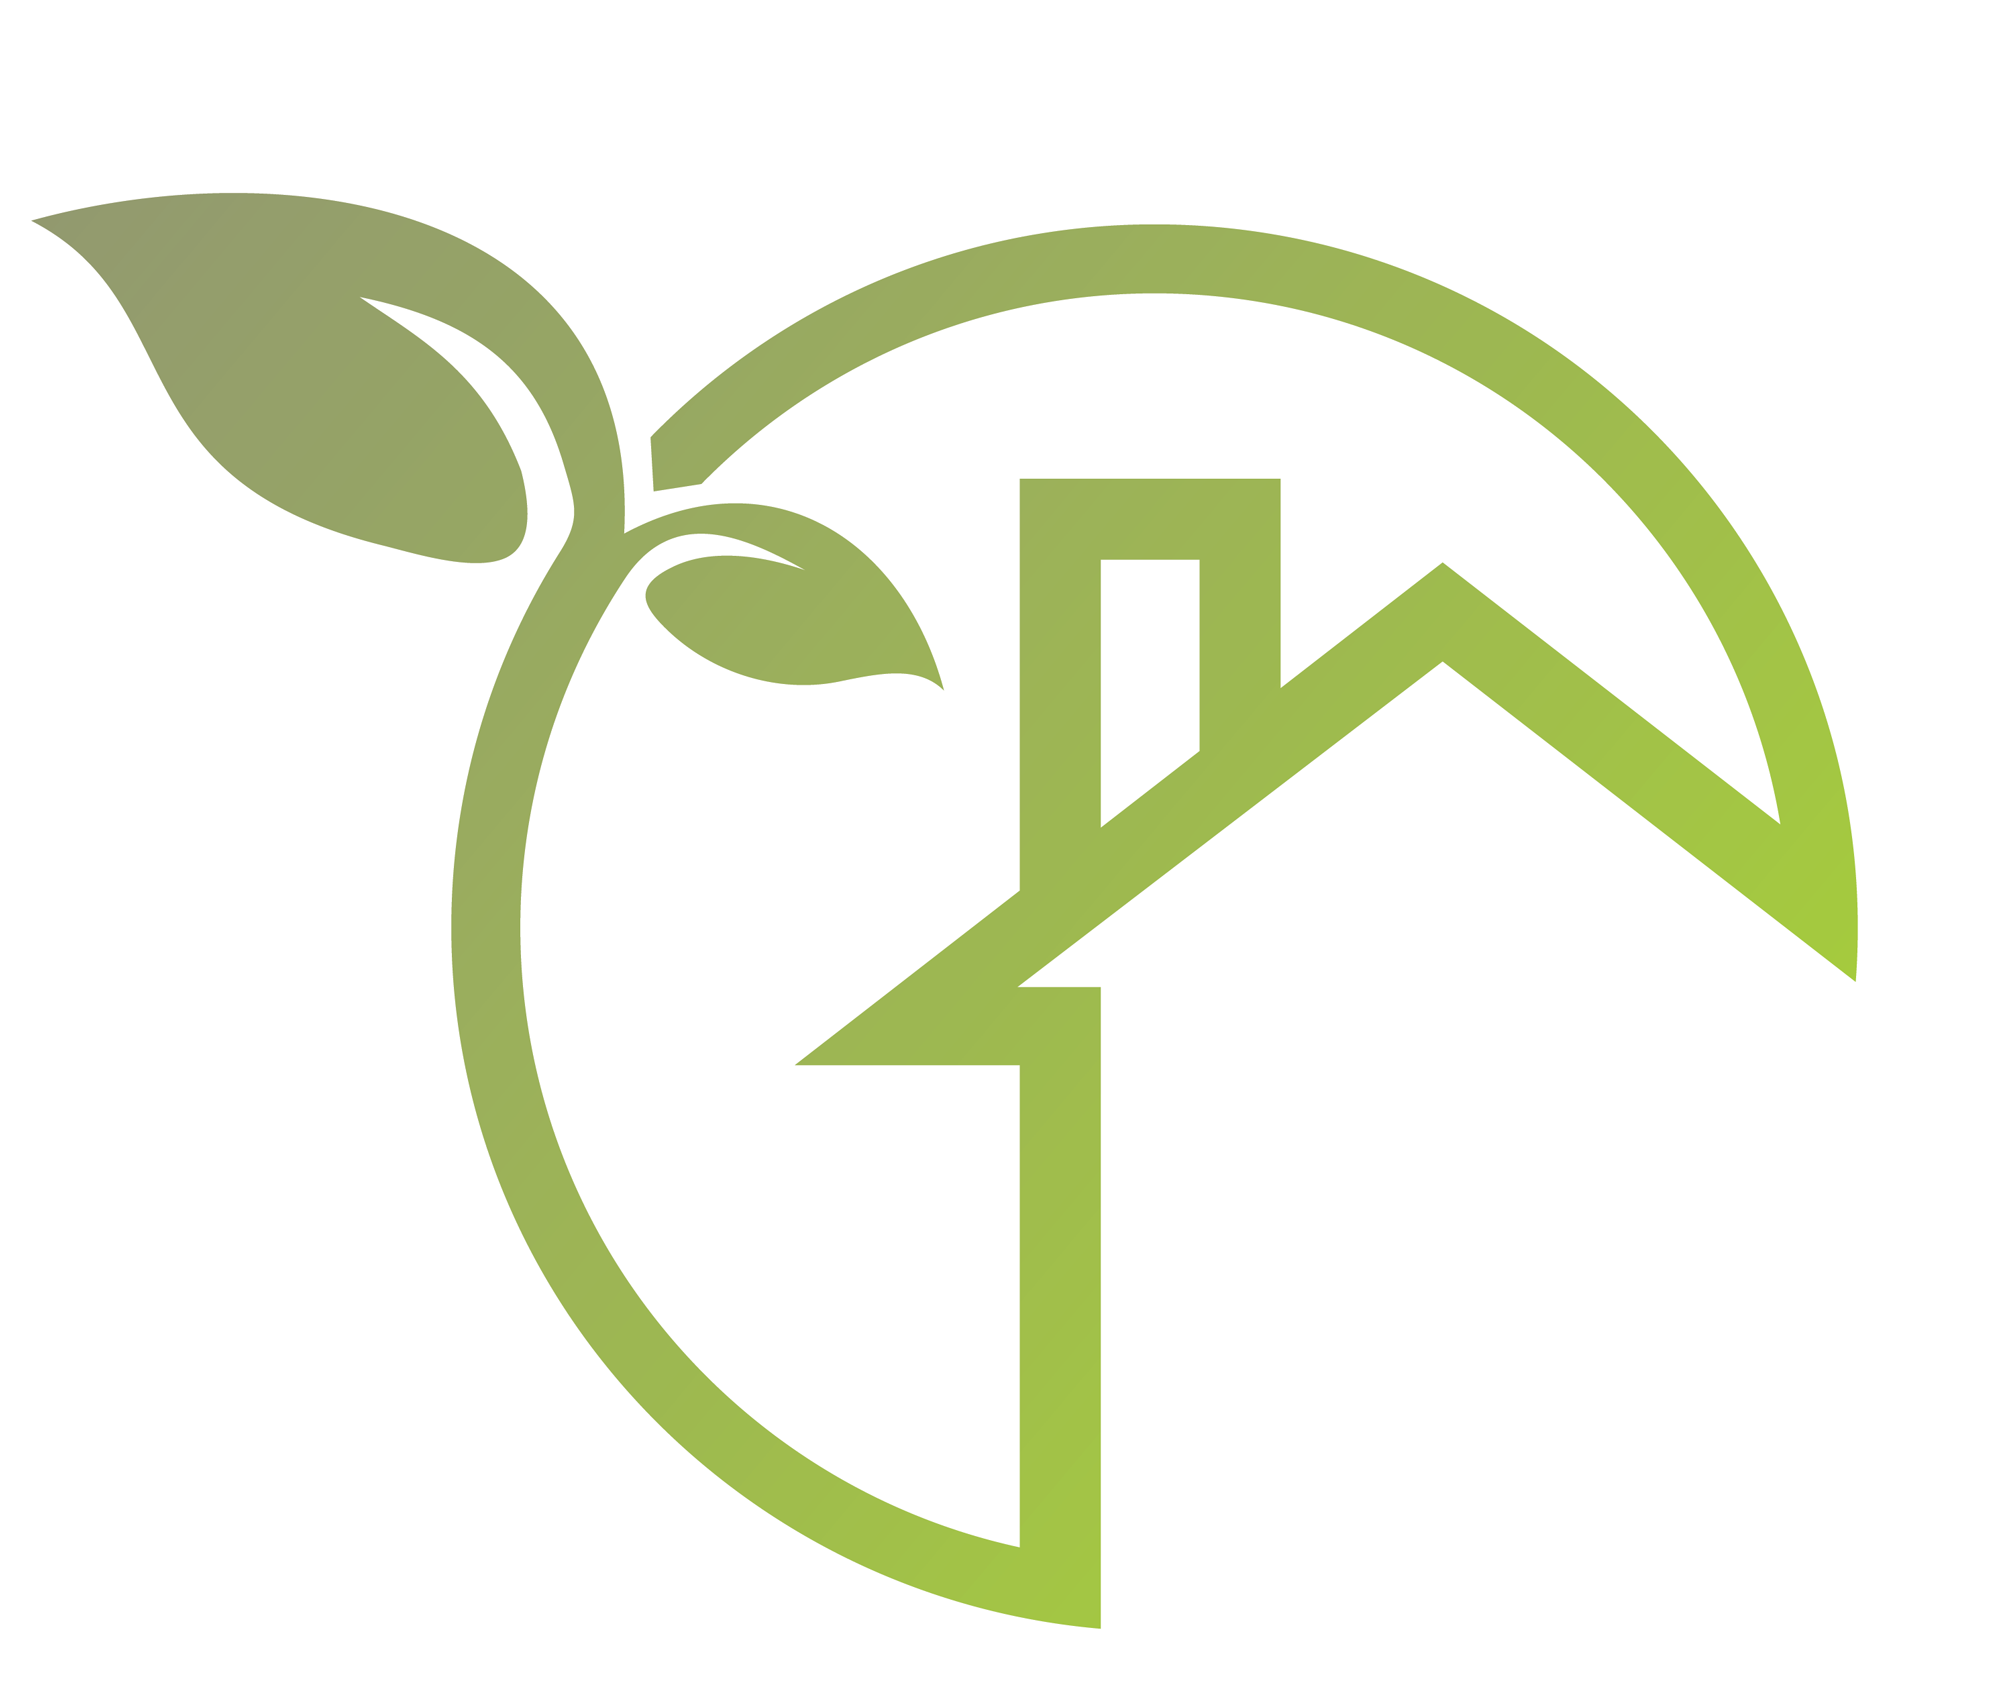 Green home symbol indicating BioHeat in use.